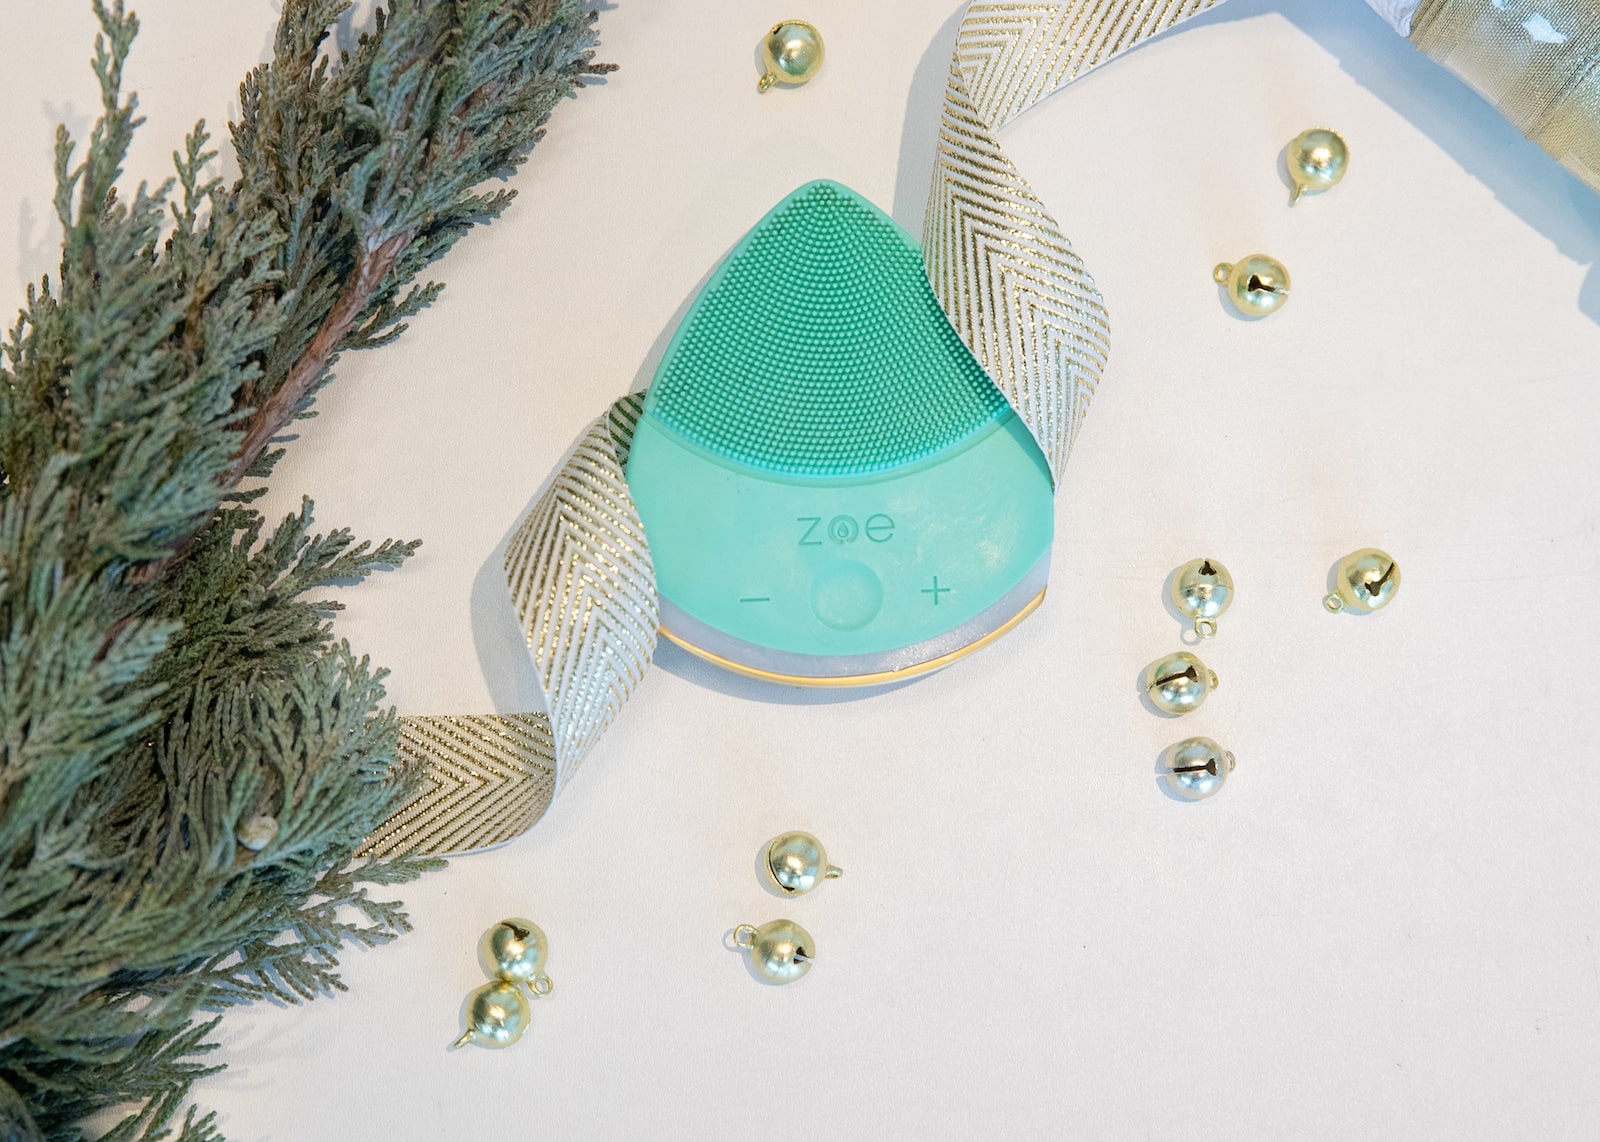 Project-Skin-Vancouver-Gift-Guide-Zoe-Bliss